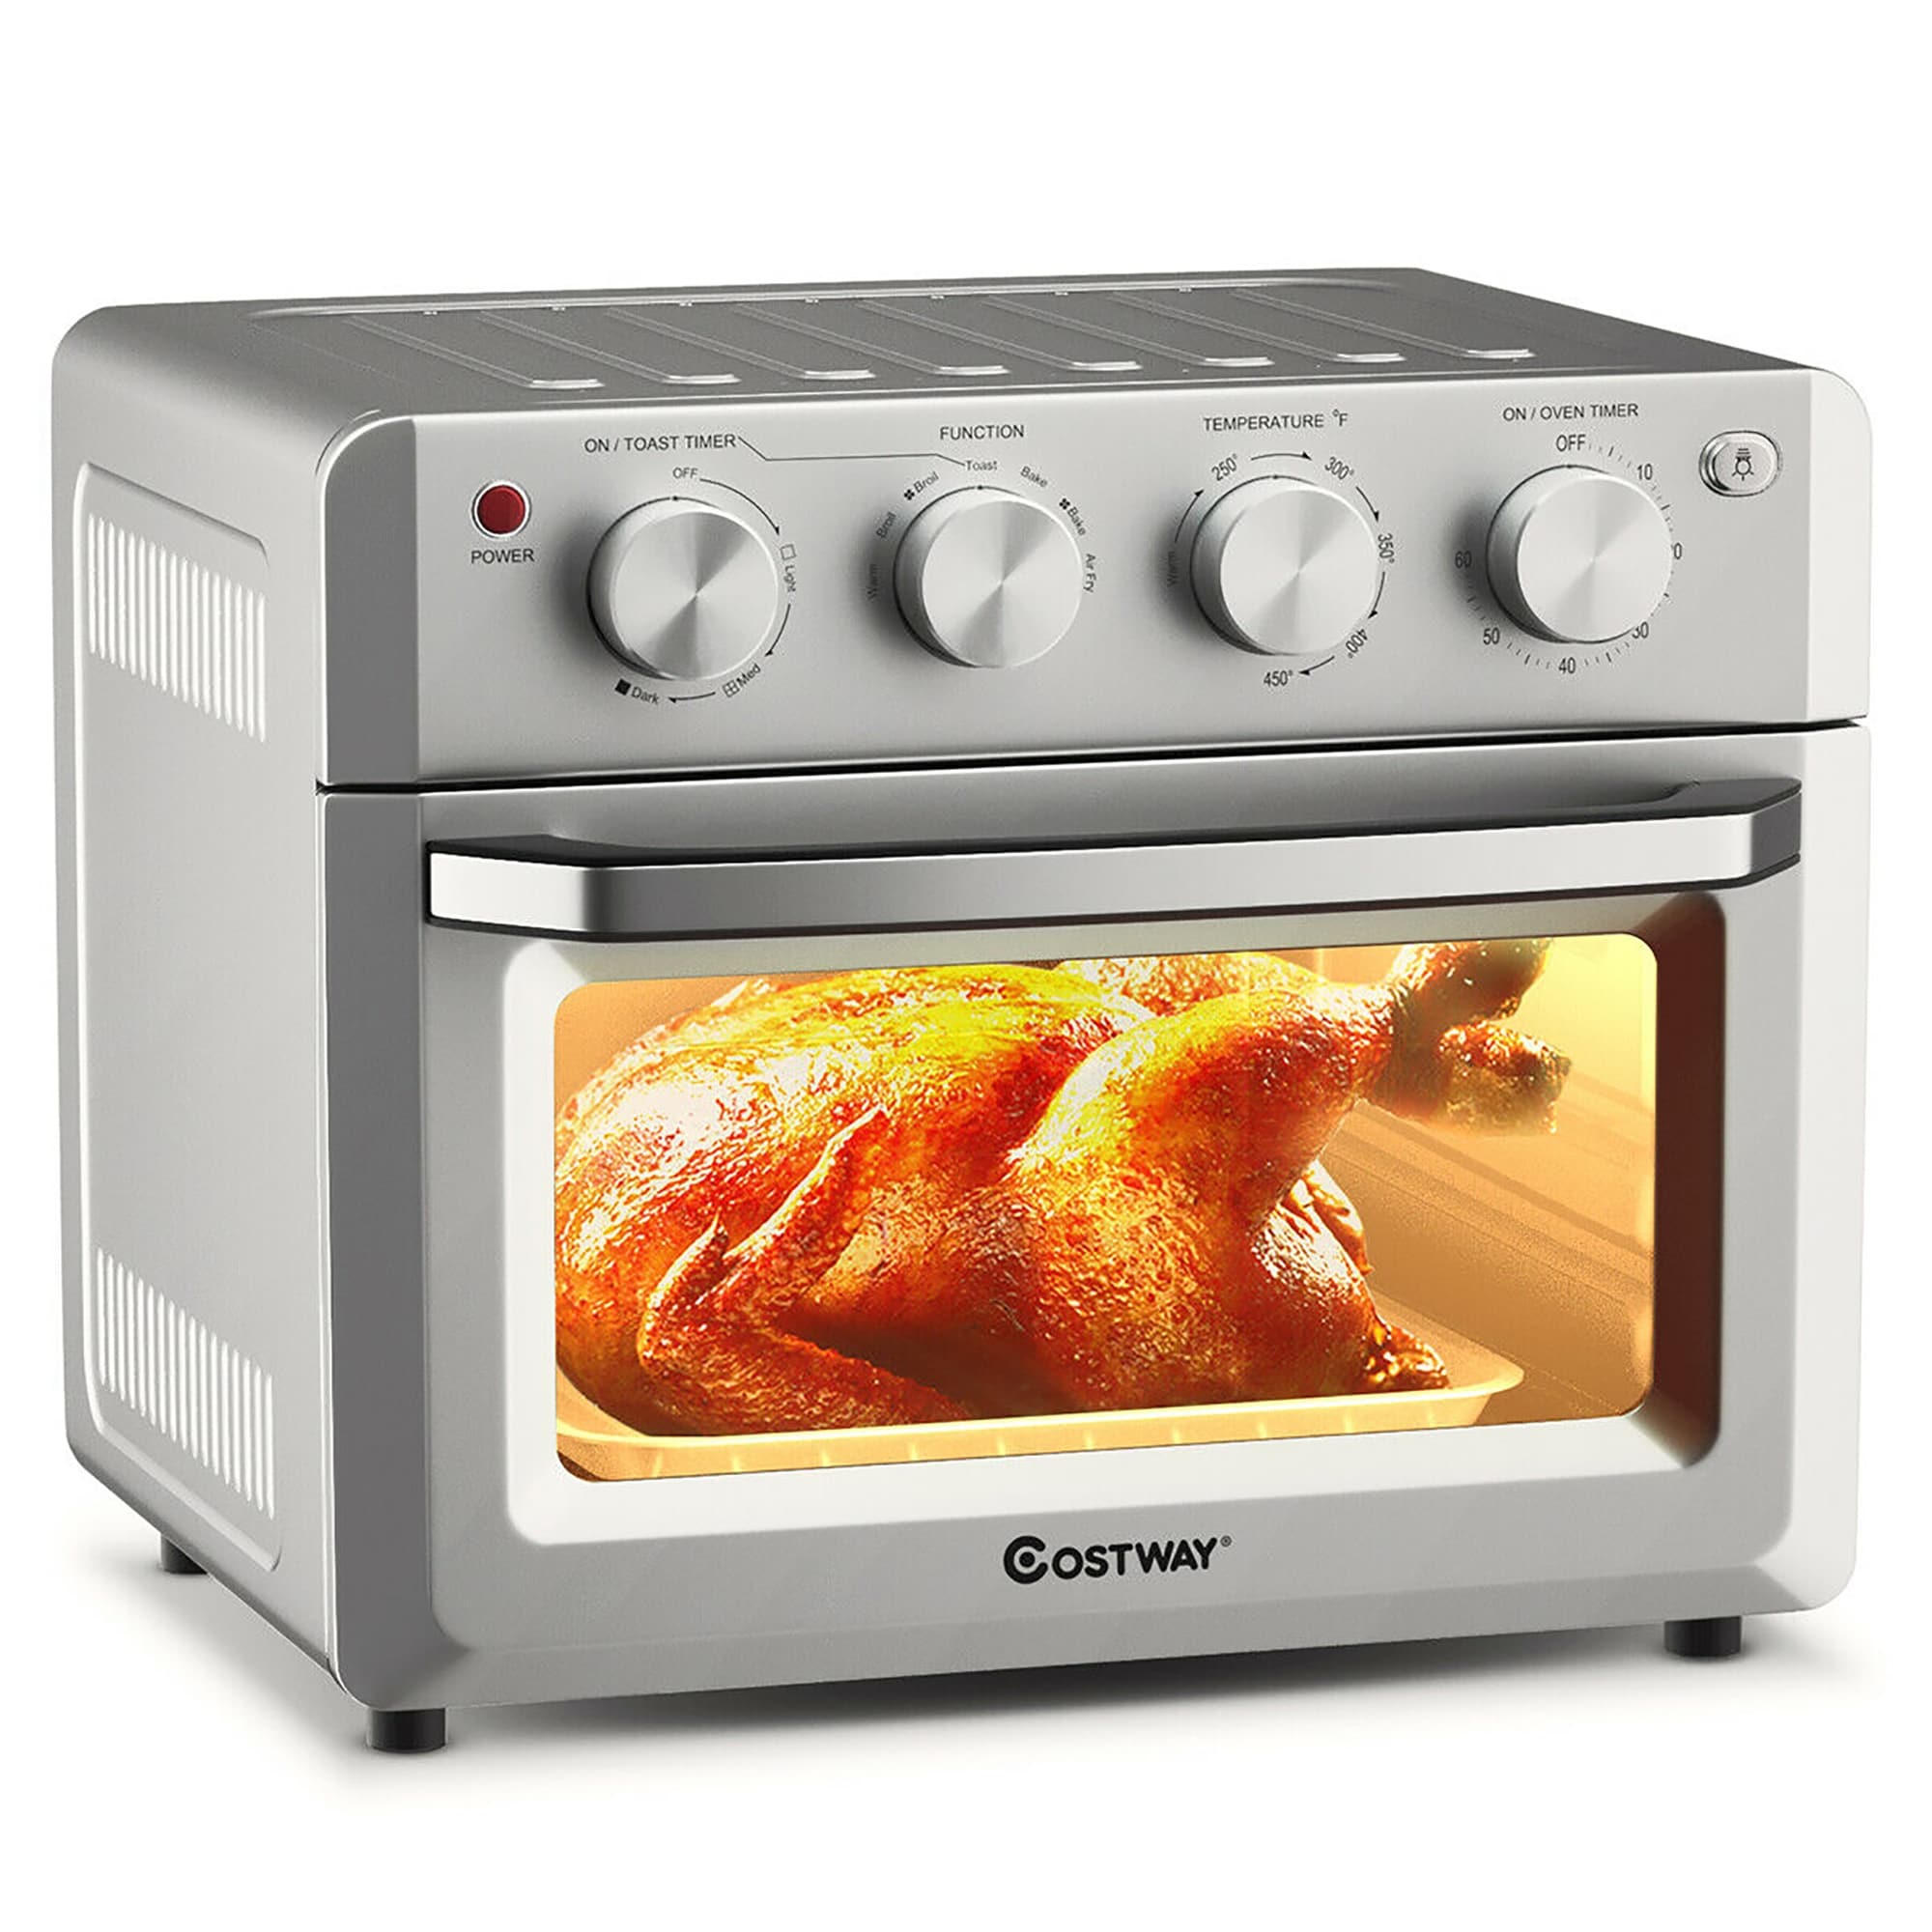 https://ak1.ostkcdn.com/images/products/is/images/direct/7dca4c2c1edd1b8066cf91ee335d43ed62fcbcb0/Costway-7-in-1-Air-Fryer-Toaster-Oven-19-QT-Dehydrate-Convection-Ovens.jpg